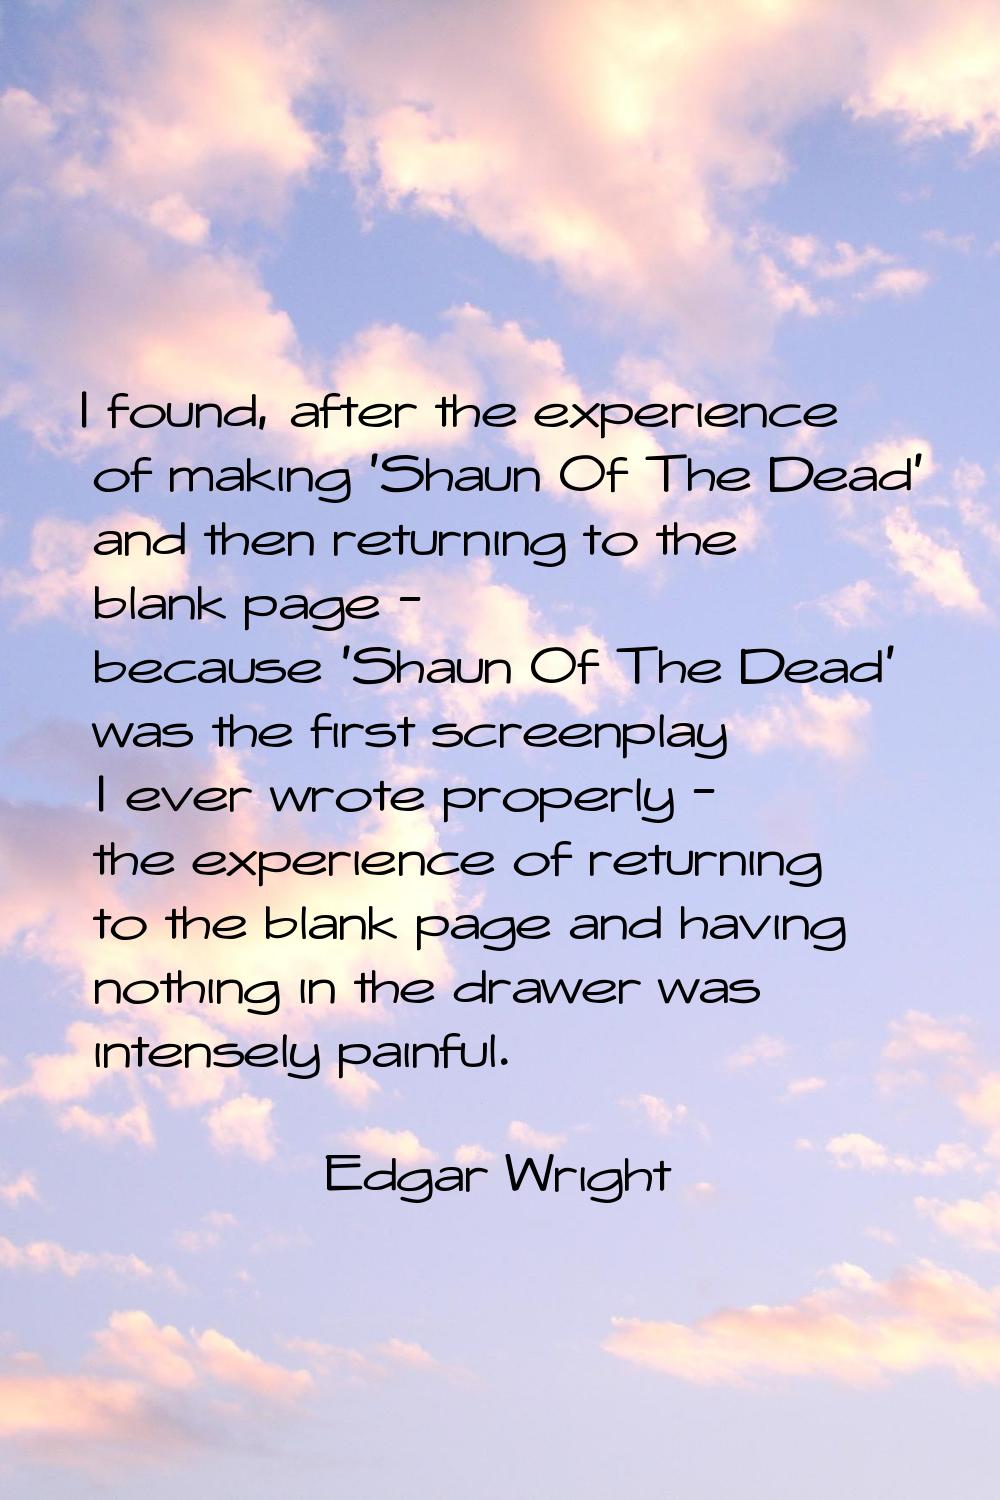 I found, after the experience of making 'Shaun Of The Dead' and then returning to the blank page - 